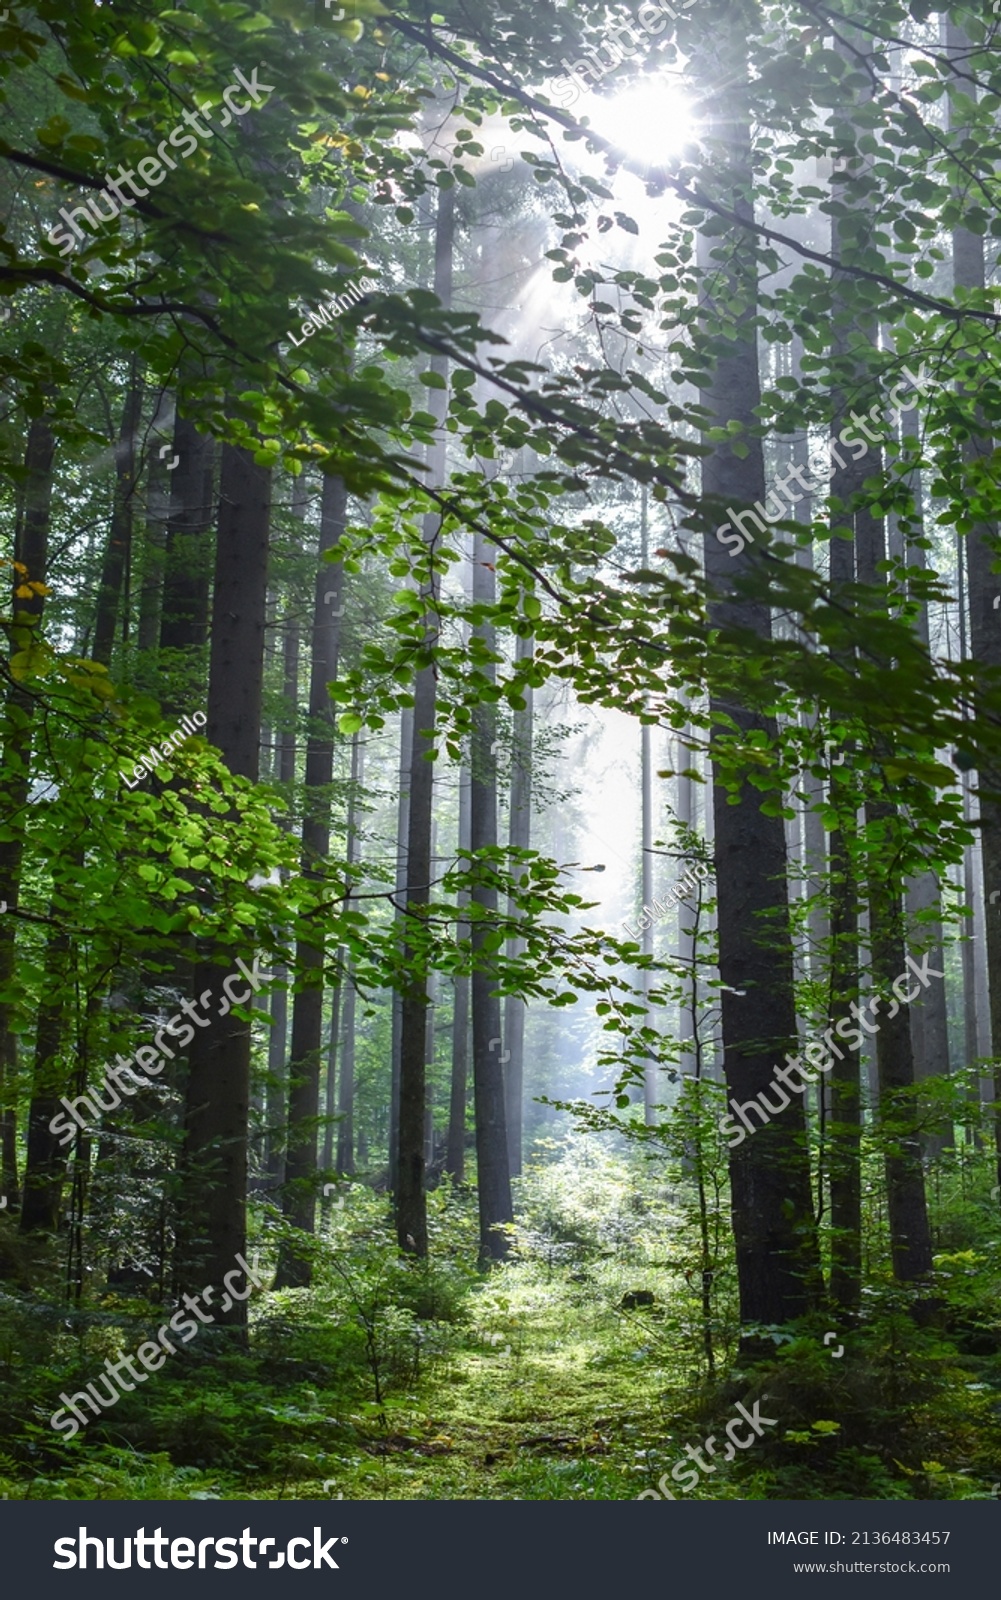 Trunks of tall trees in a beech forest on a summer morning #2136483457